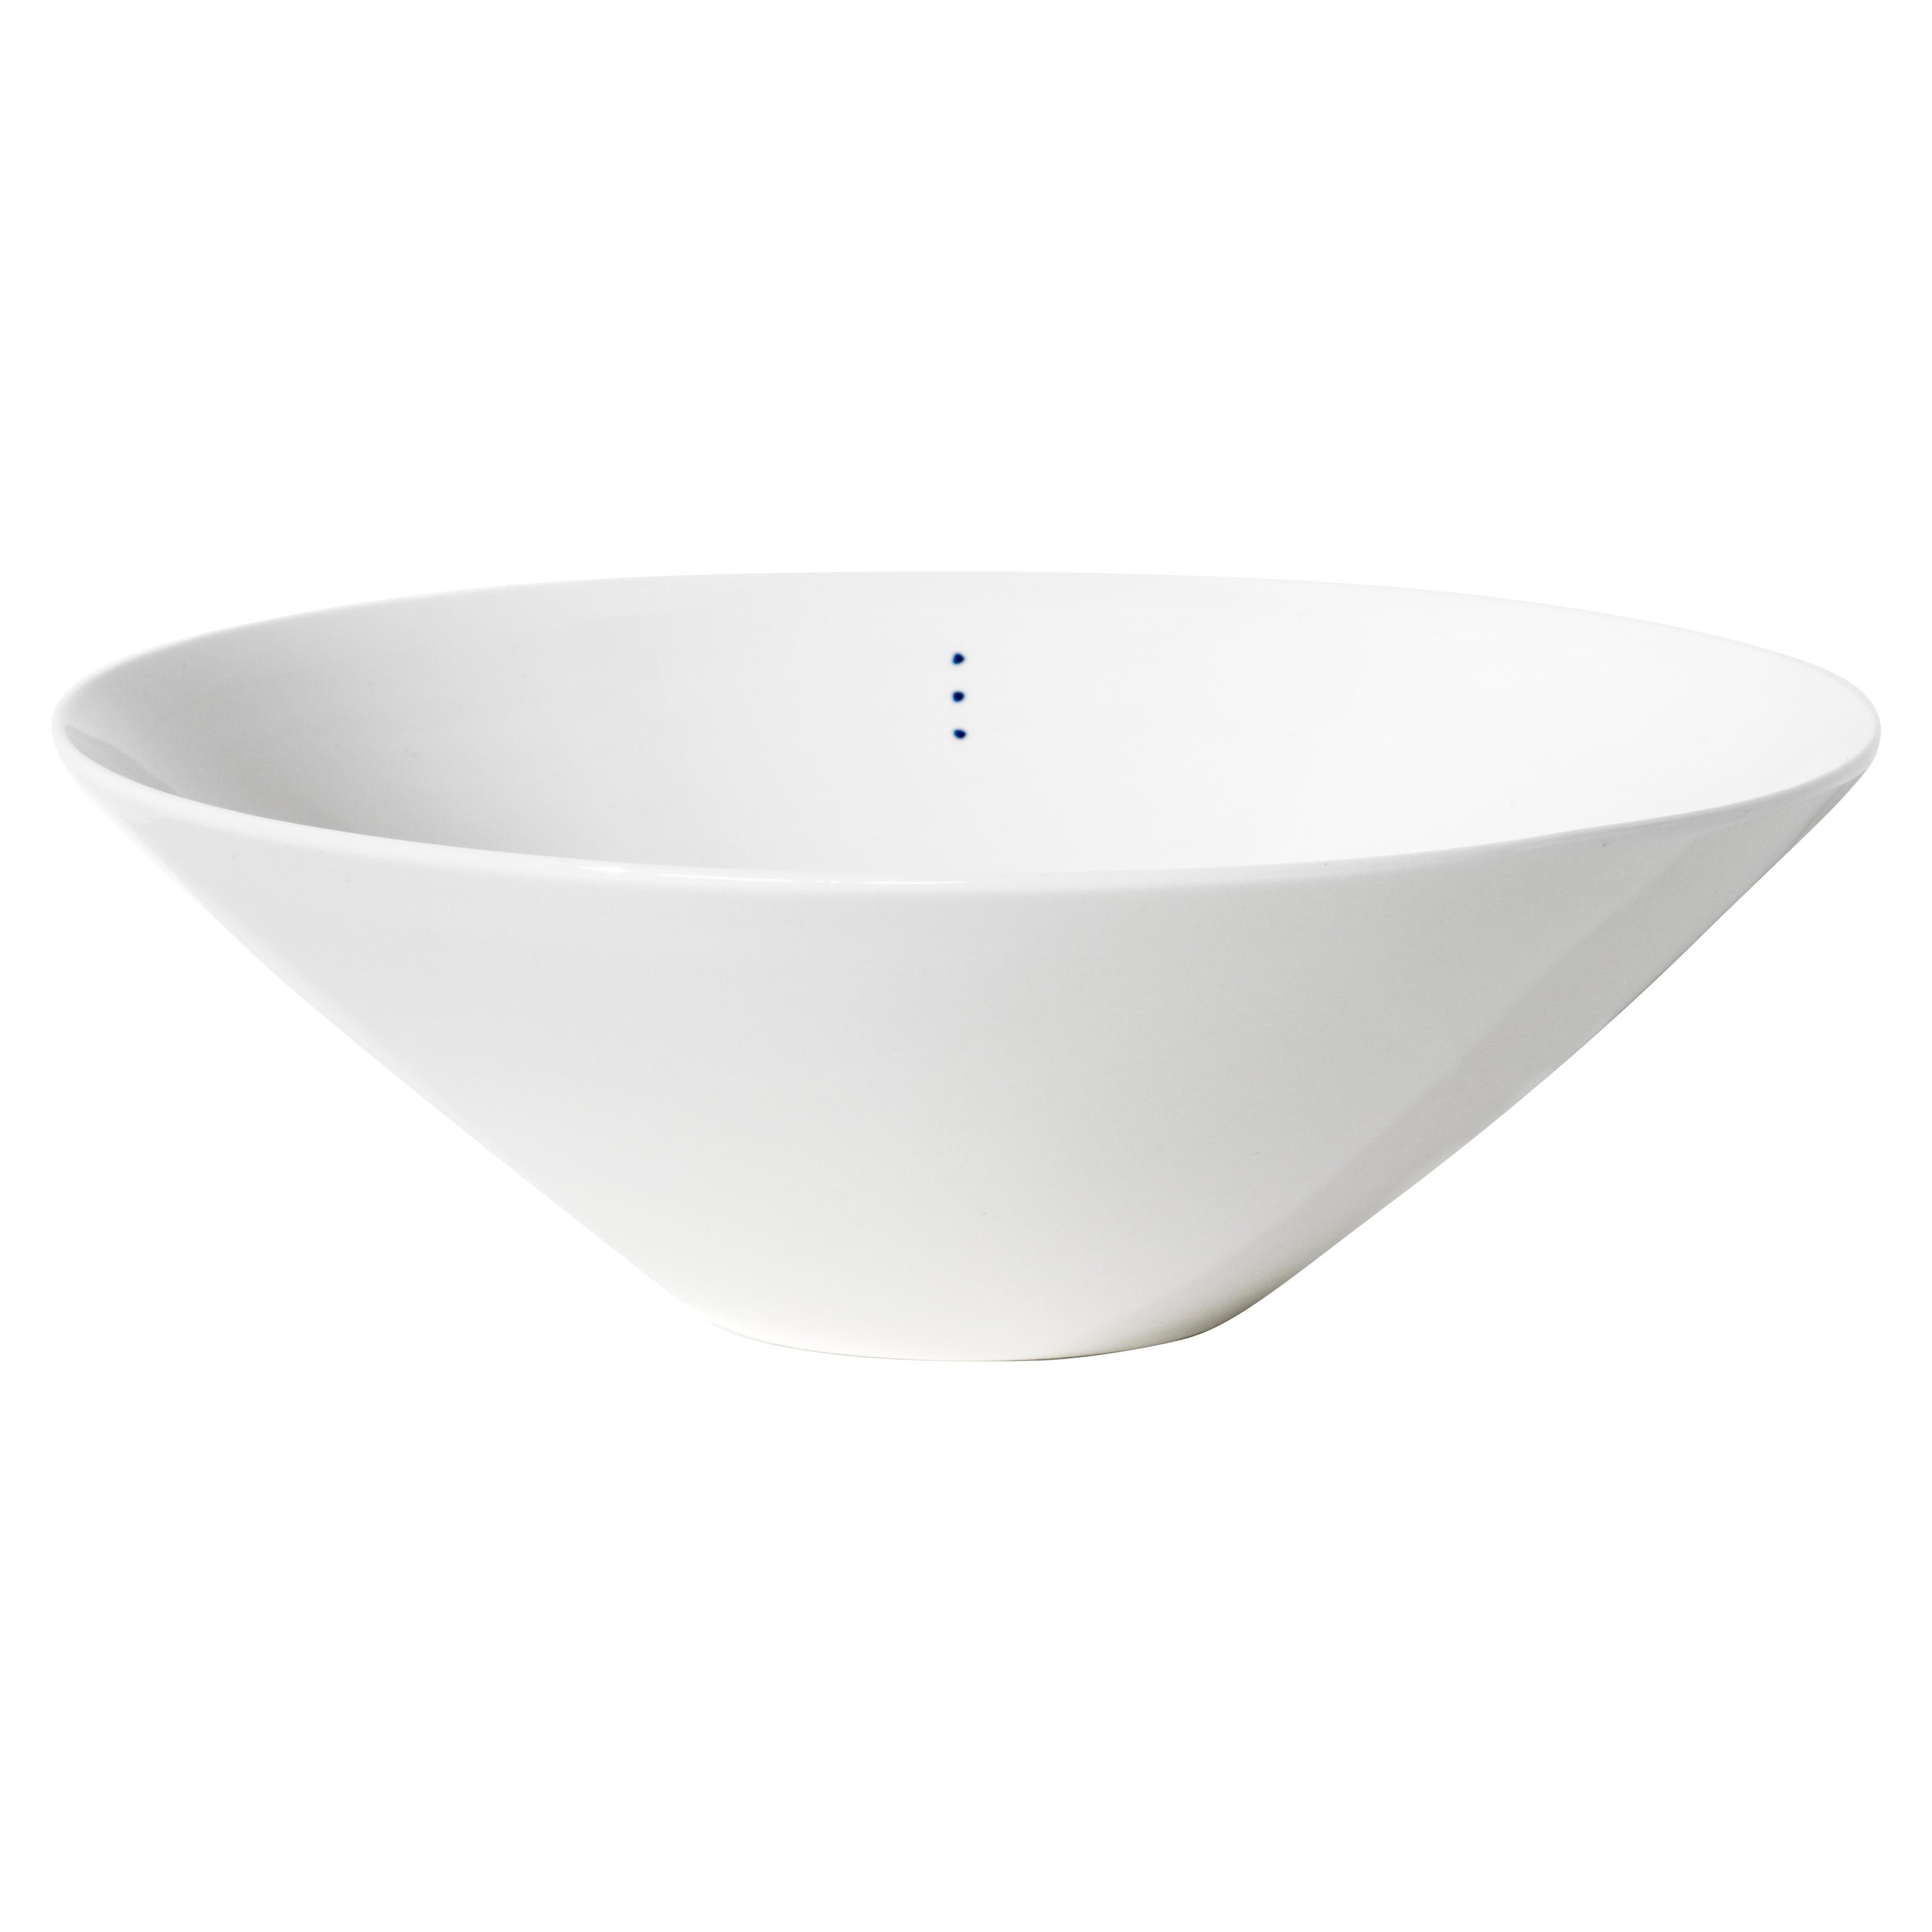 Shiro bowl large 3 dots For Sale